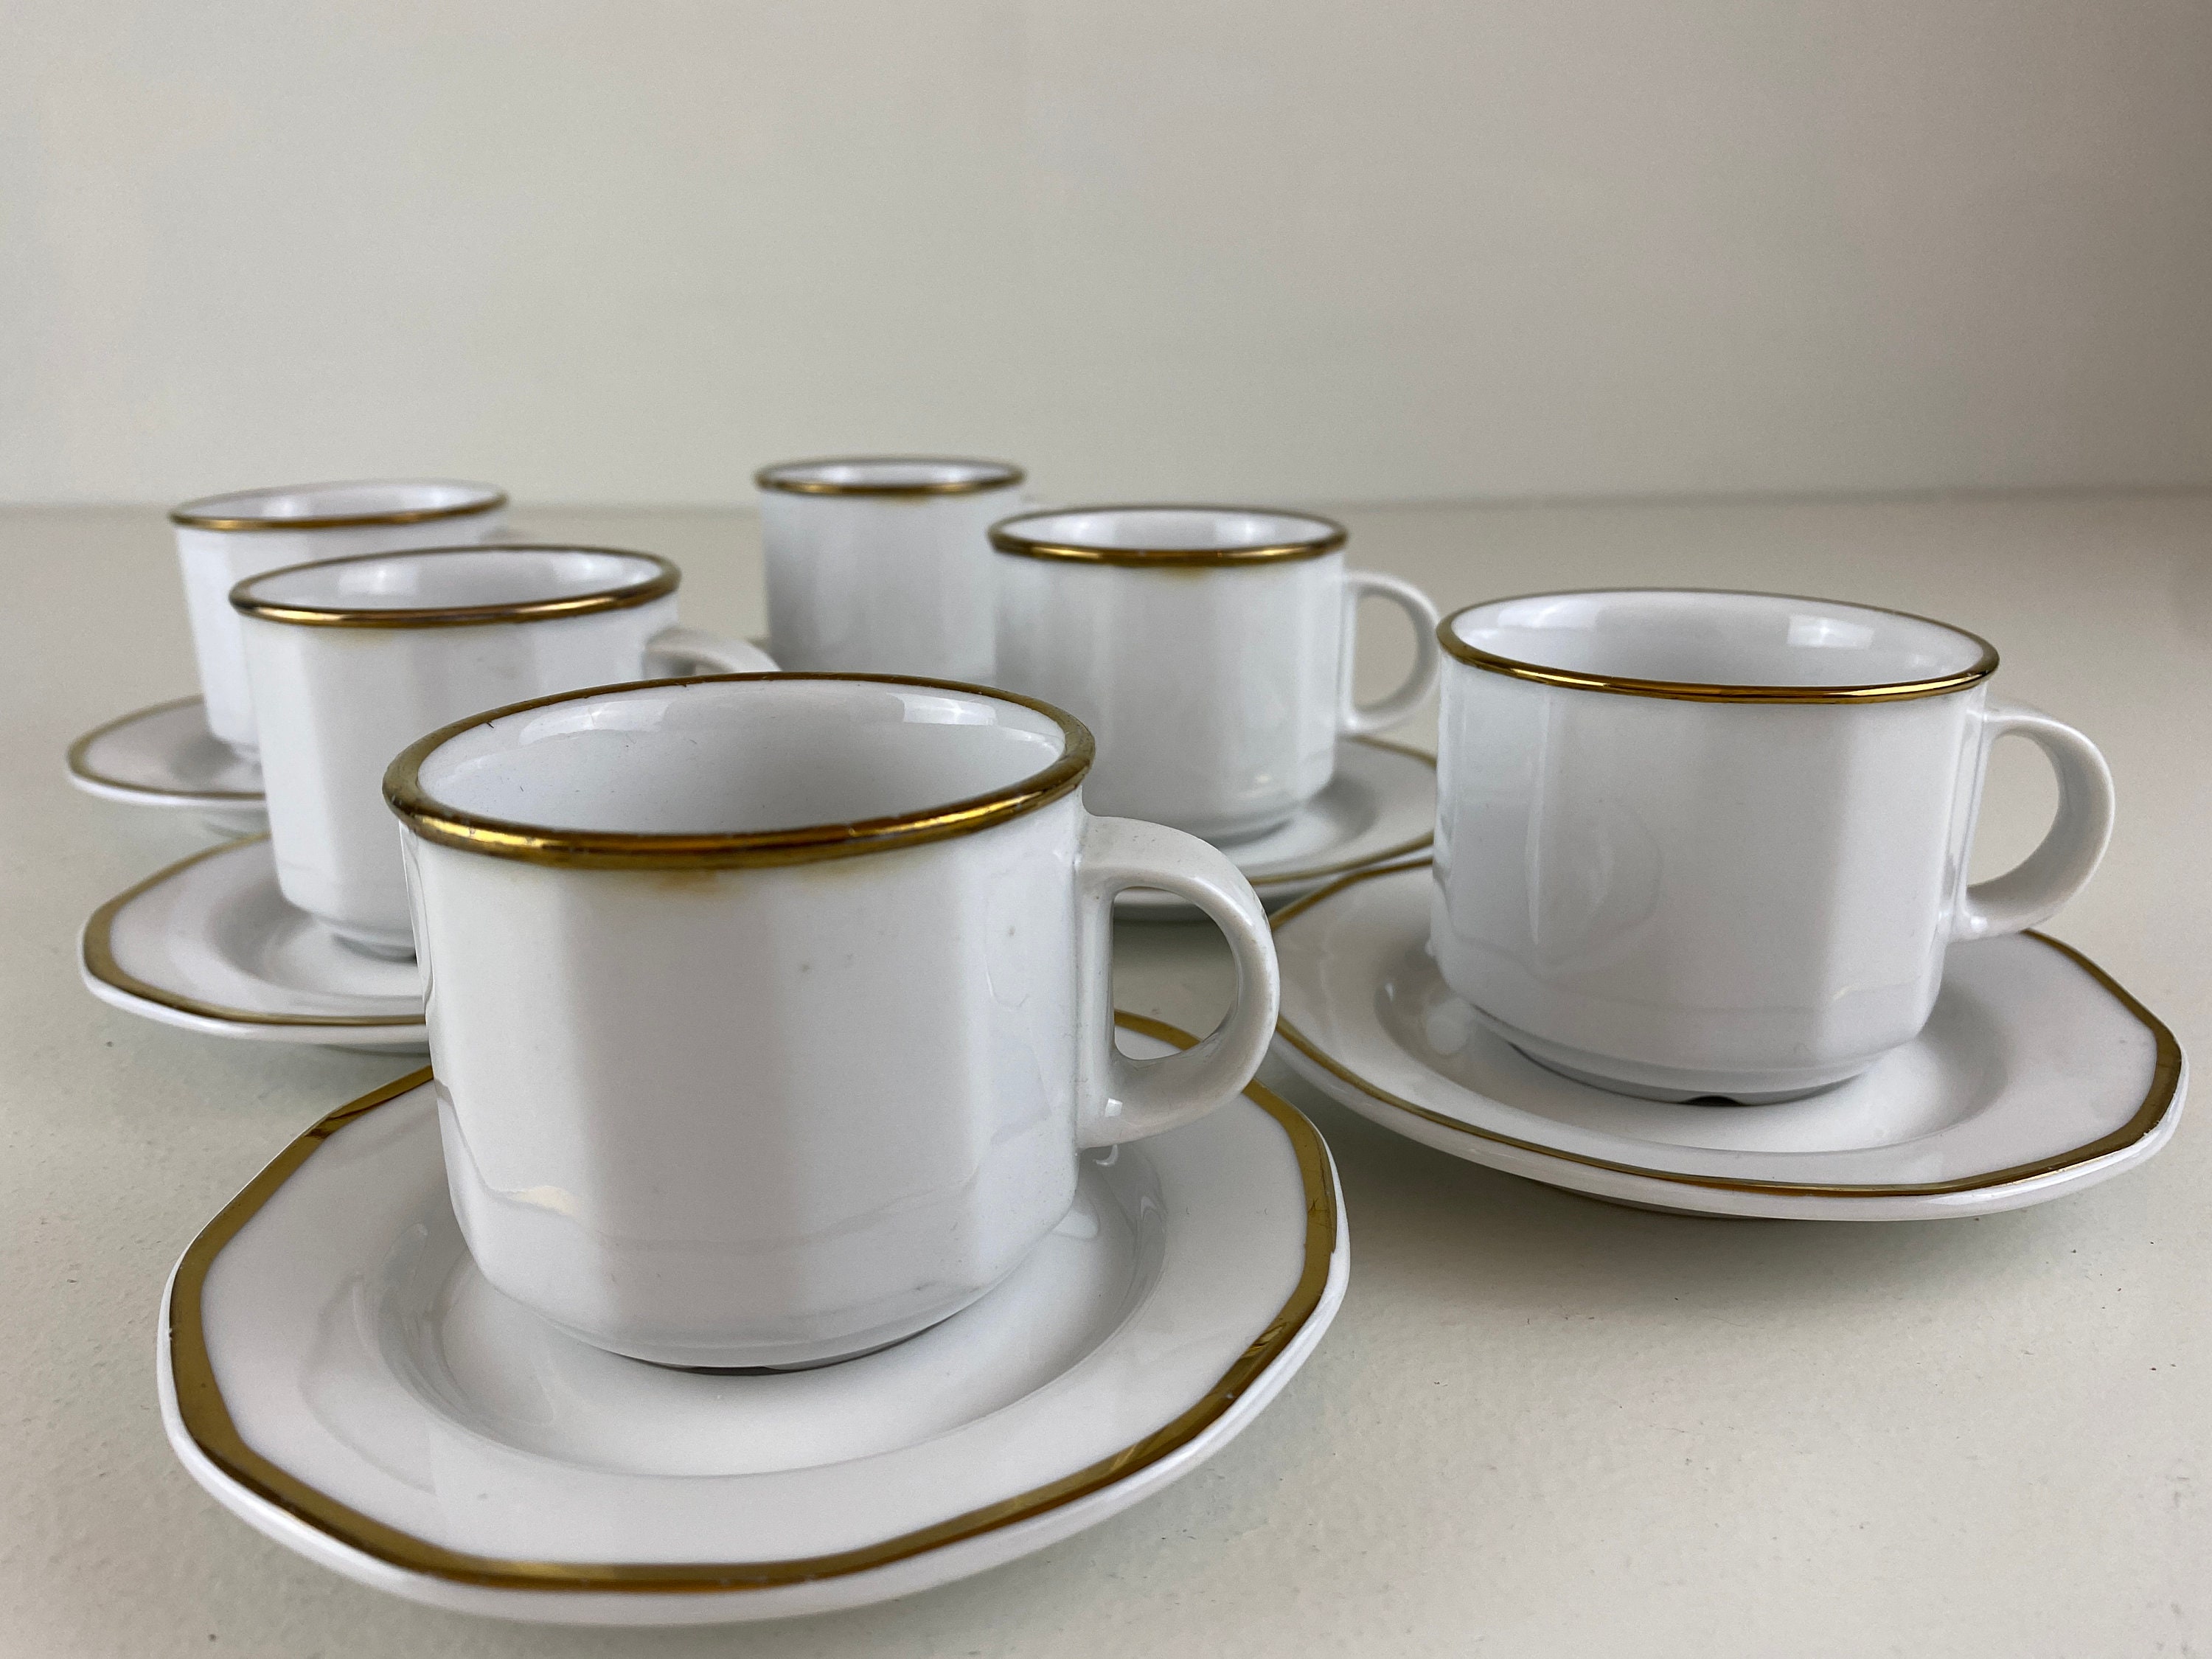 6 Espresso Cups and Saucers White With Golden Rim, Lubiana, Made in Poland,  Vintage From the 1990s -  Hong Kong